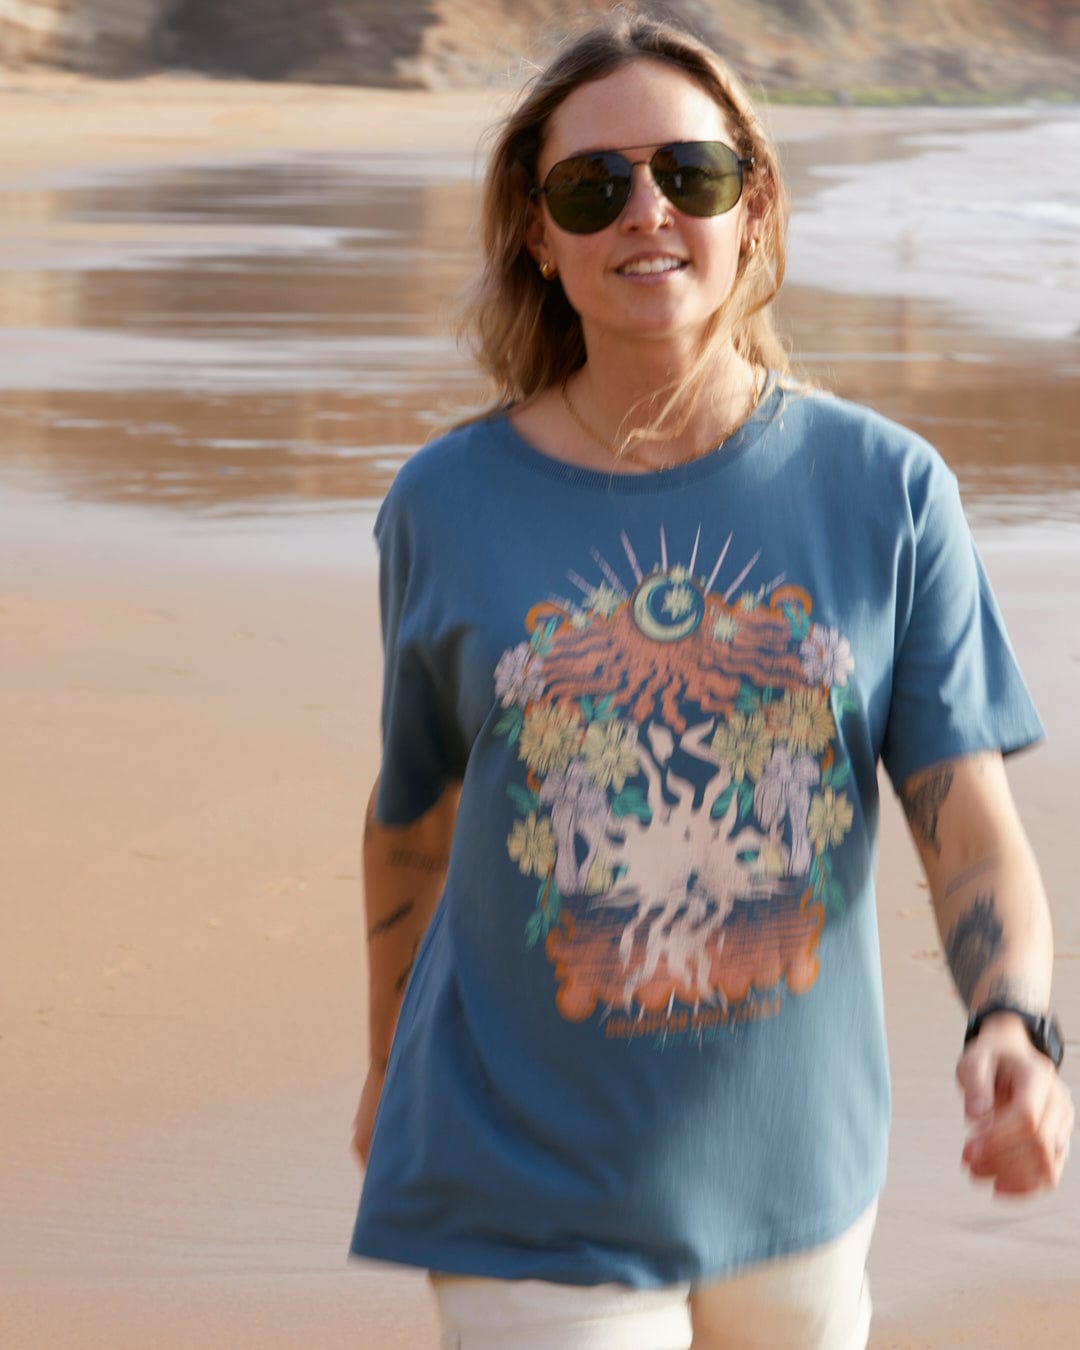 A woman in sunglasses and a relaxed loose fit Better Days - Recycled Womens Short Sleeve Relaxed T-Shirt in Teal walks on a sandy beach, with the background slightly blurred.